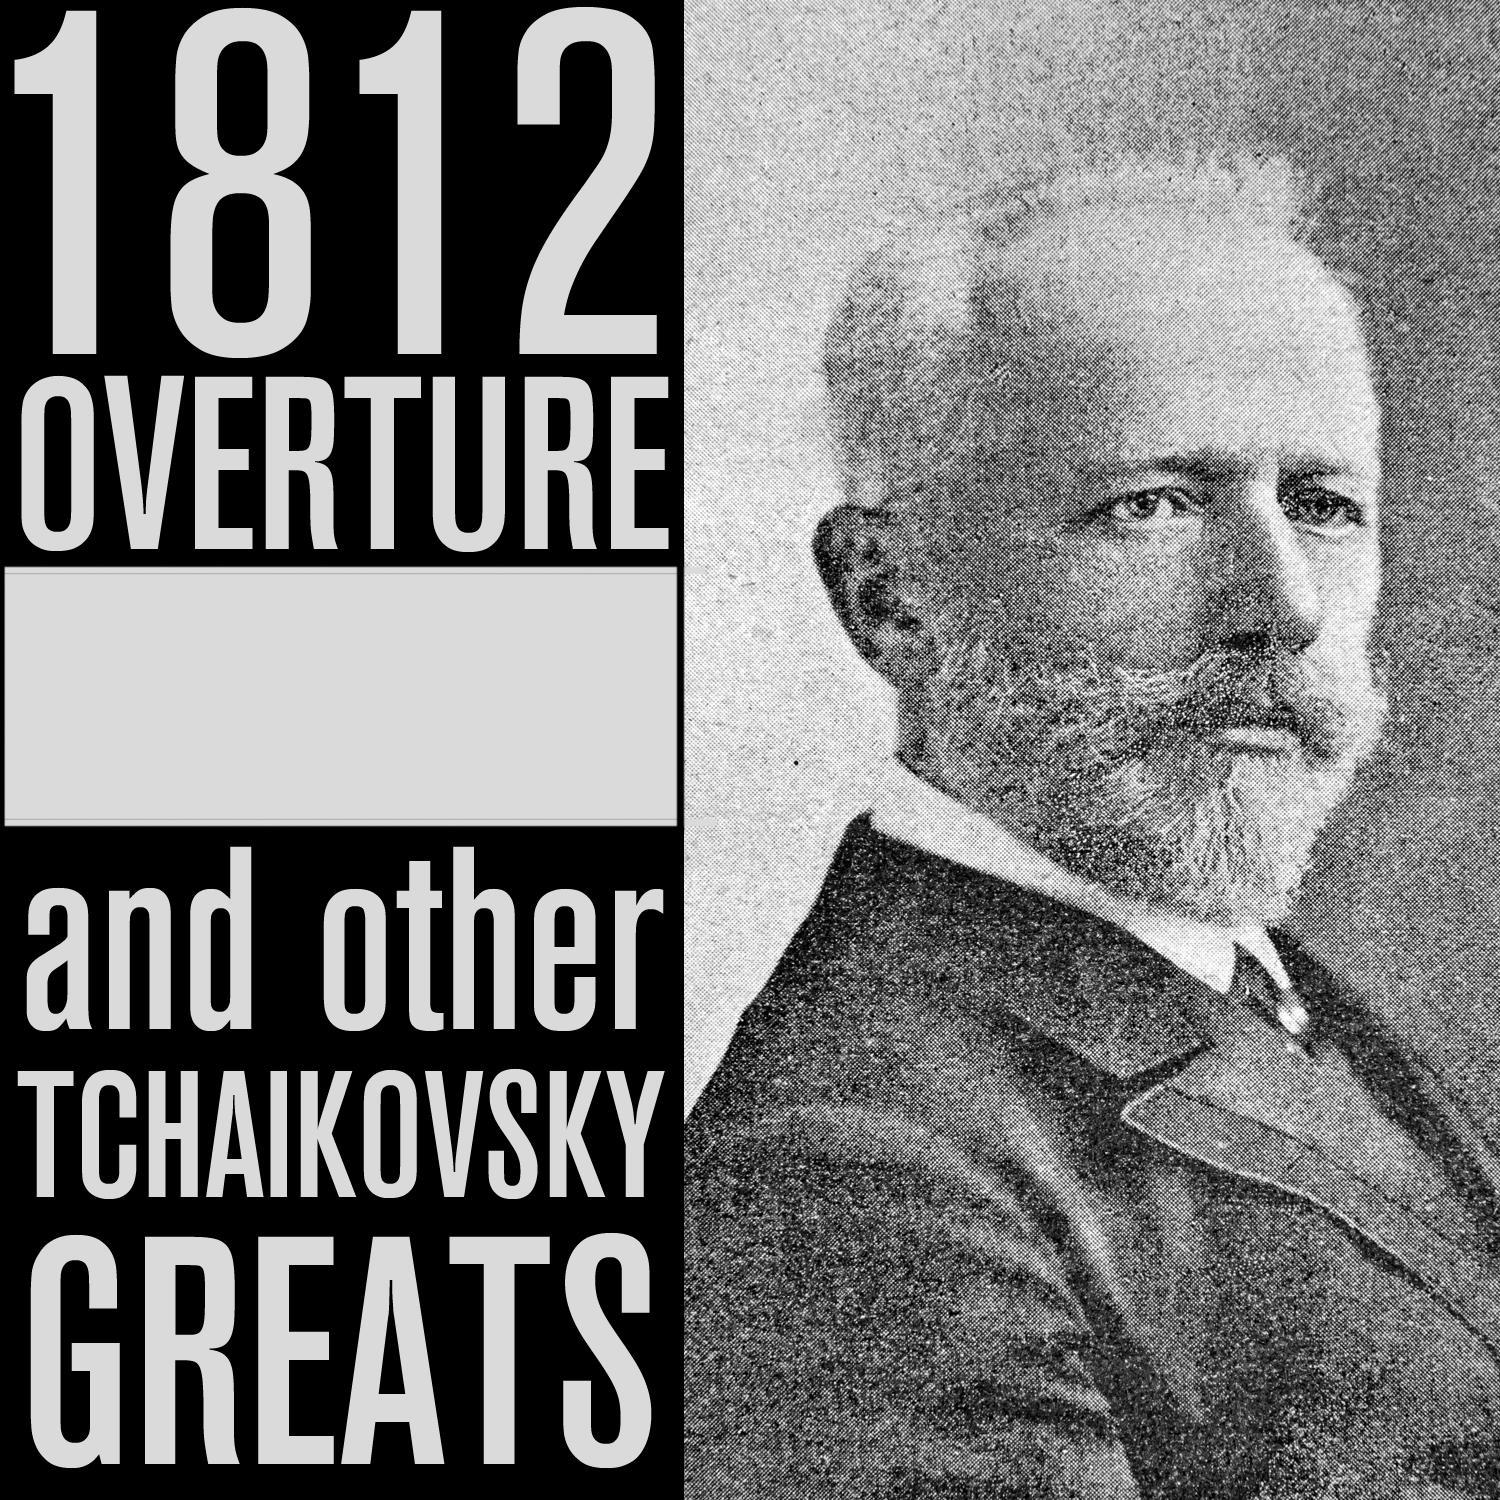 1812 Overture and Other Tchaikovsky Greats